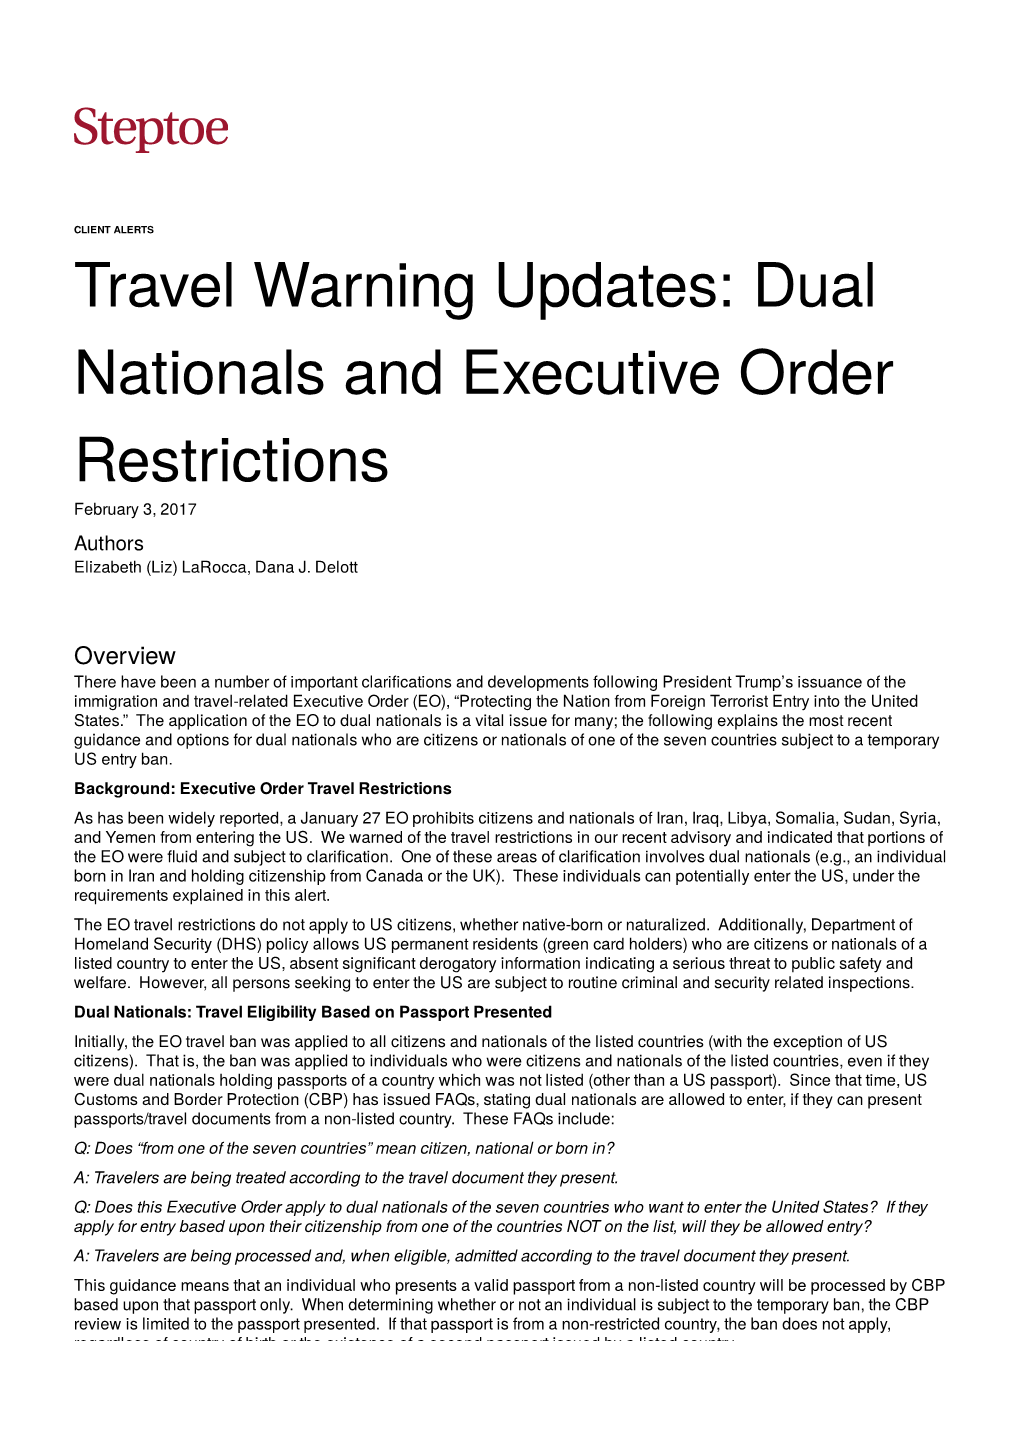 Travel Warning Updates: Dual Nationals and Executive Order Restrictions